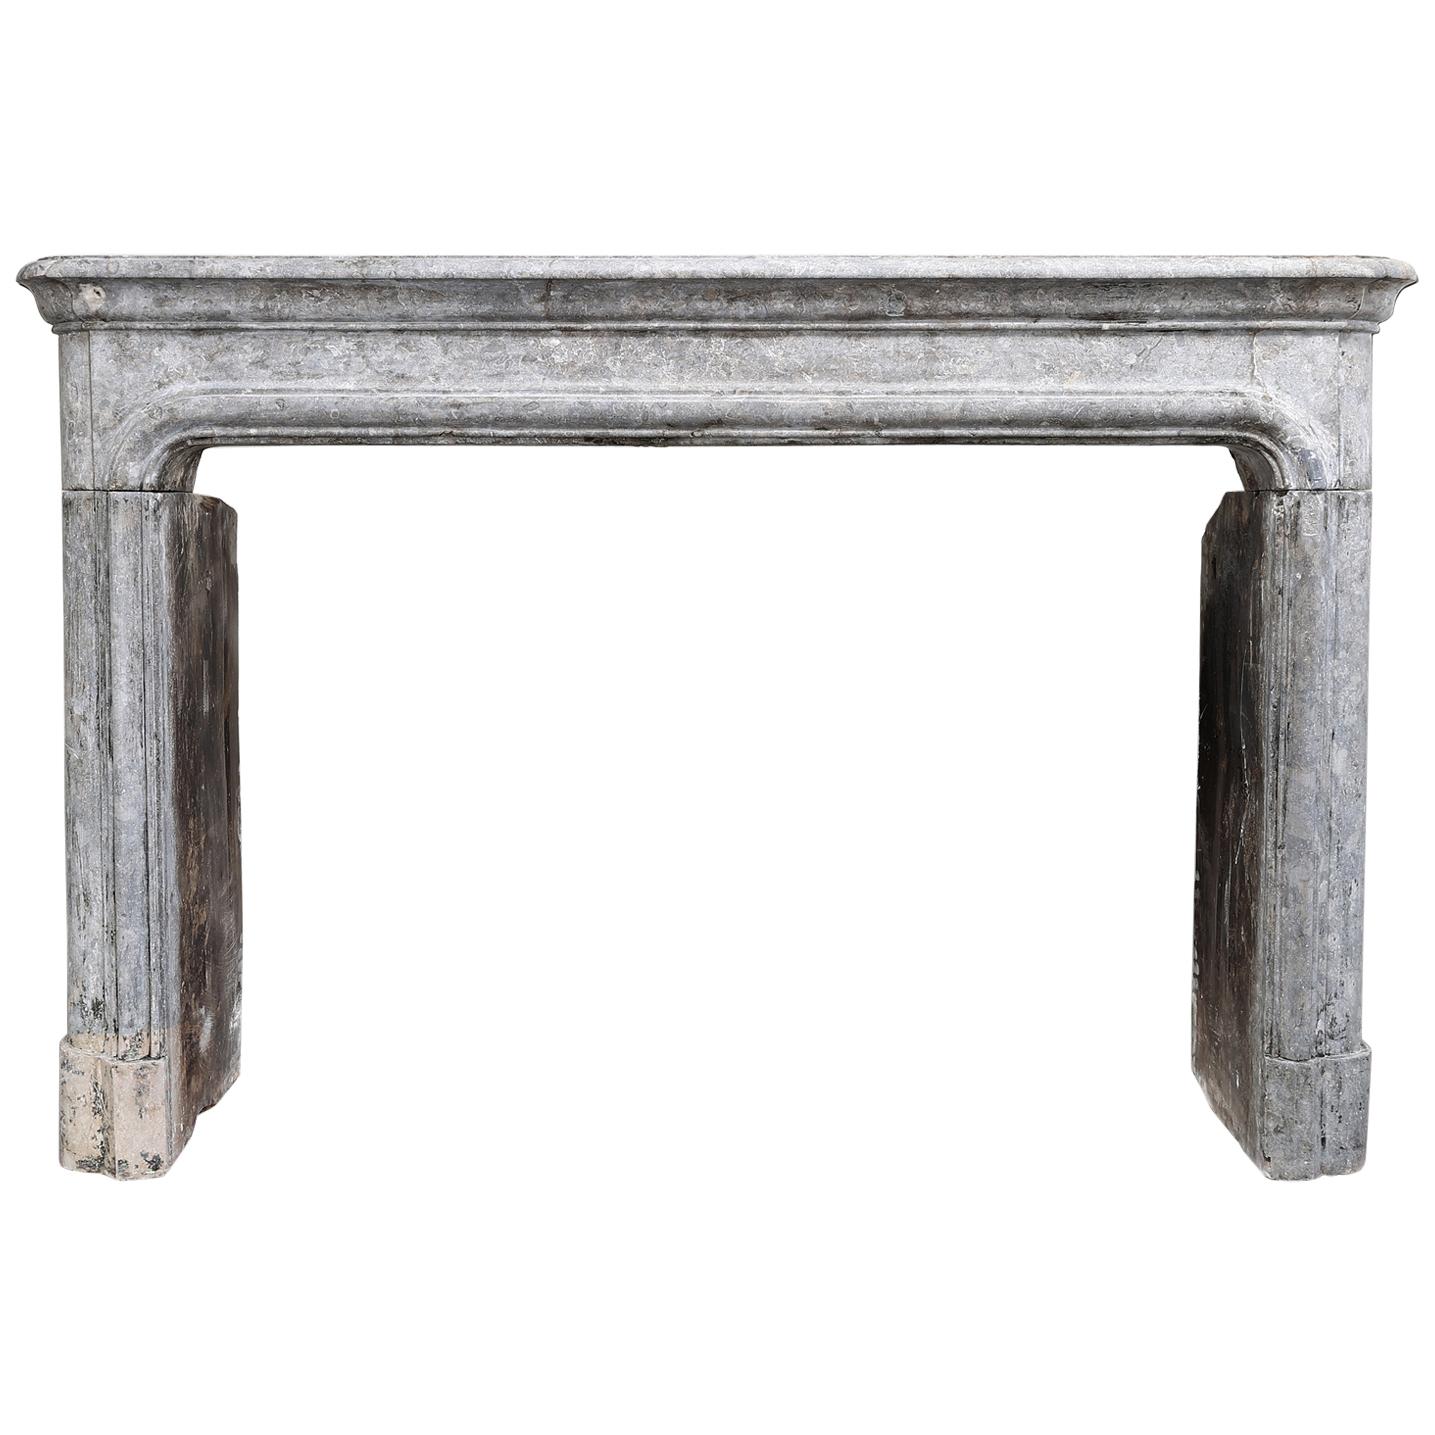 19th Century Mantle of Bicolor Marble Stone in Style of Louis XIV